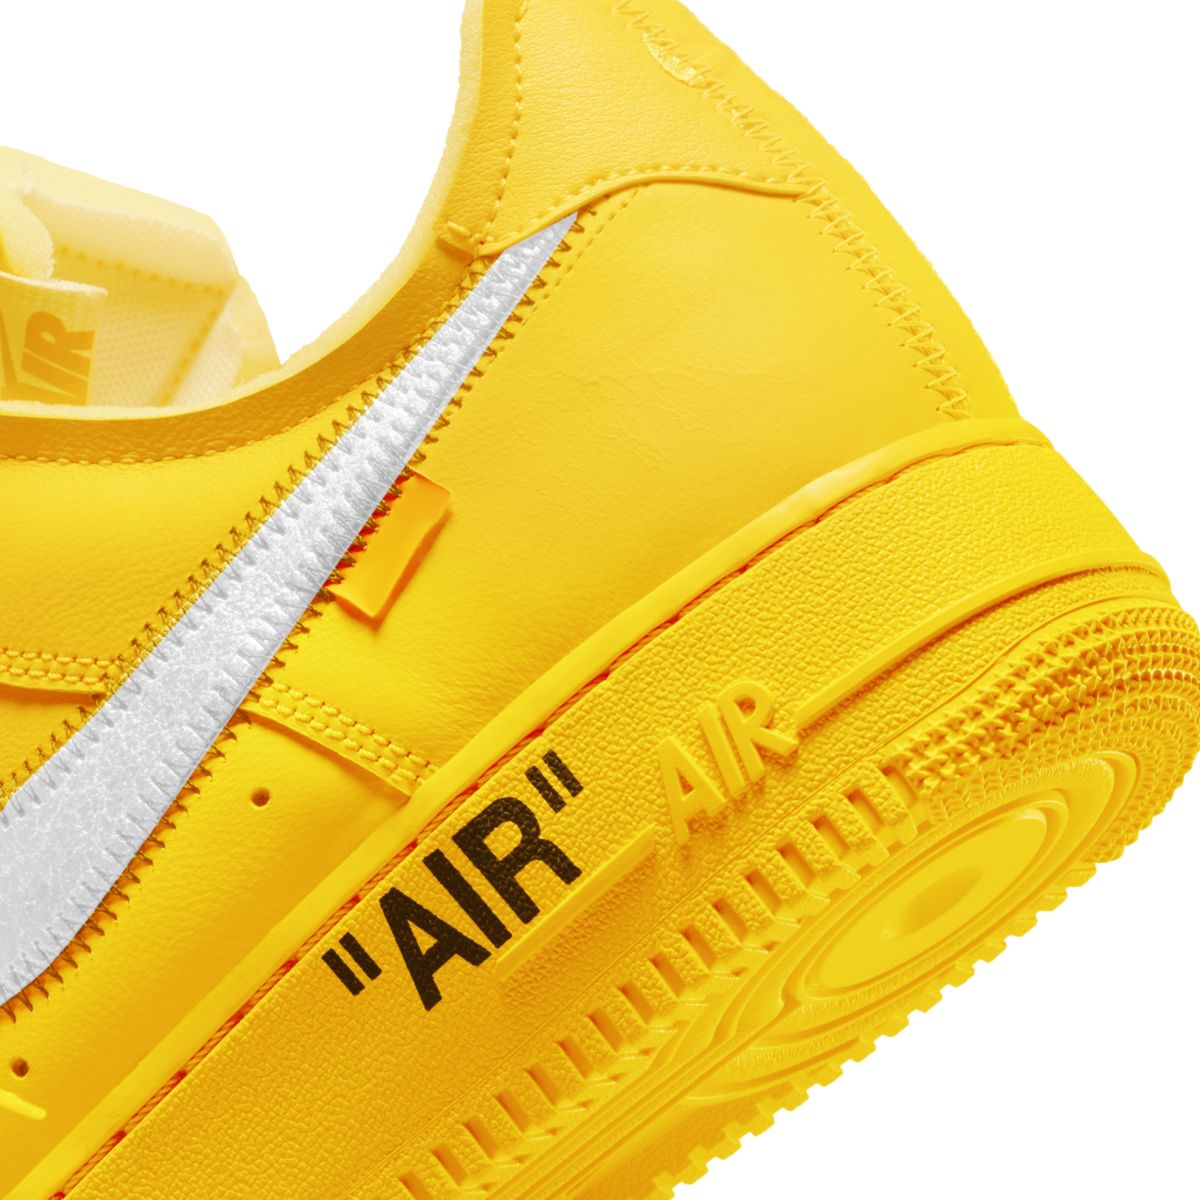 Off-White x Nike Air Force 1 Low University Gold DD1876-700 8